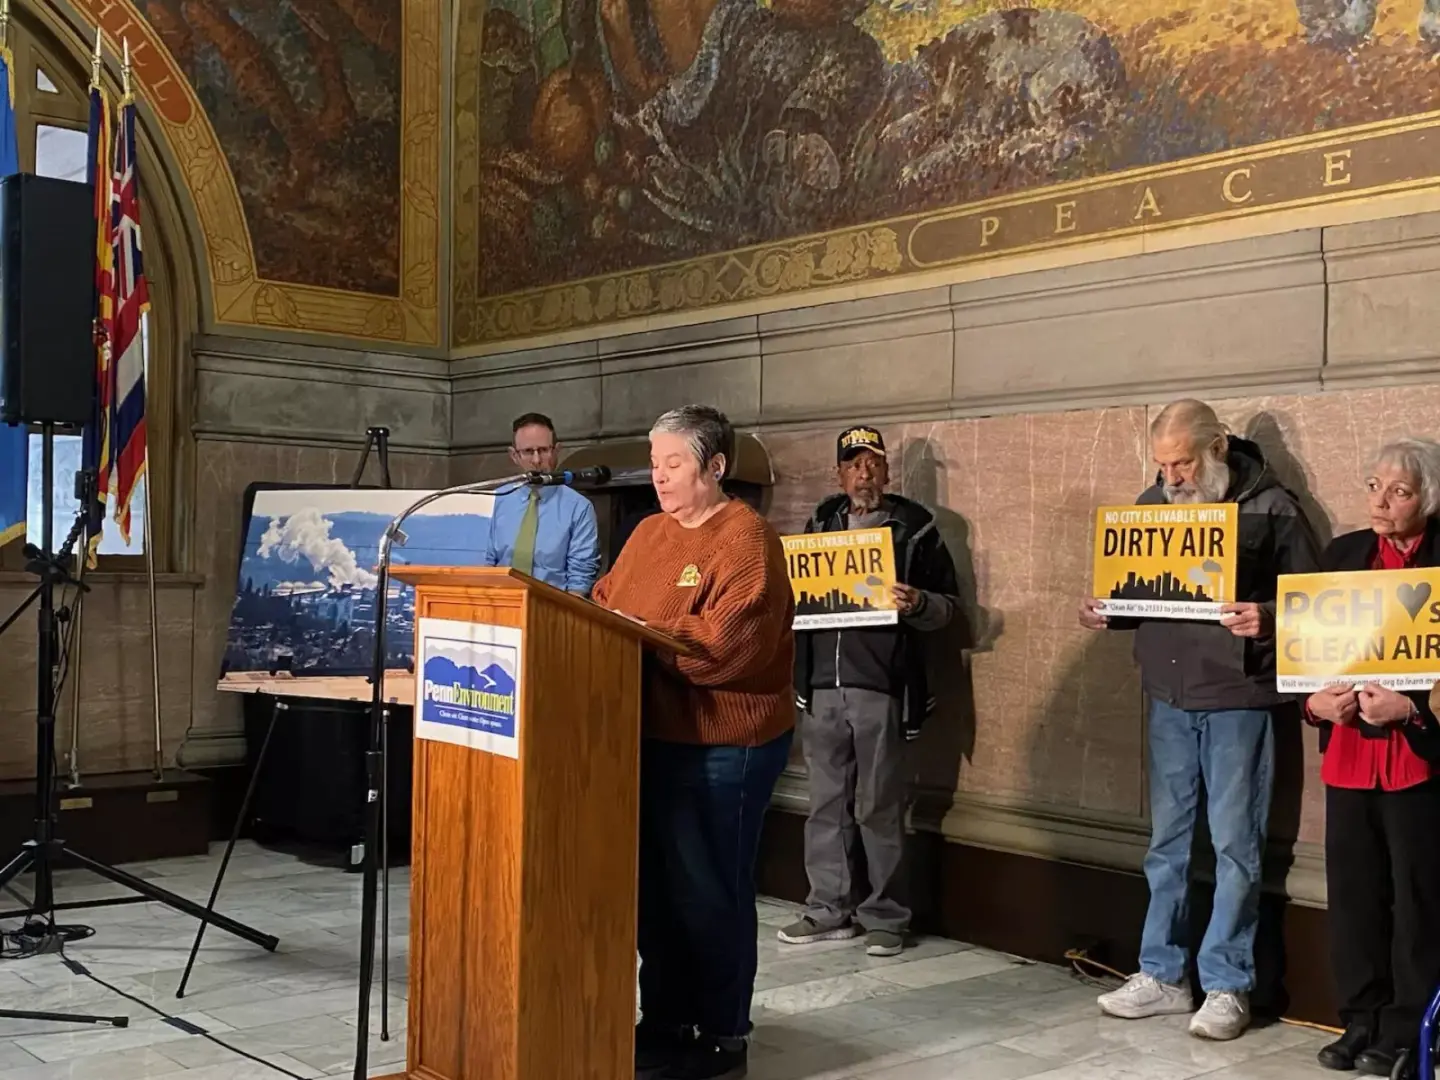 At a Jan. 29 press conference, North Braddock resident Edith Abeyta said a settlement involving pollution violations at the Clairton Coke Works could bring about a day 